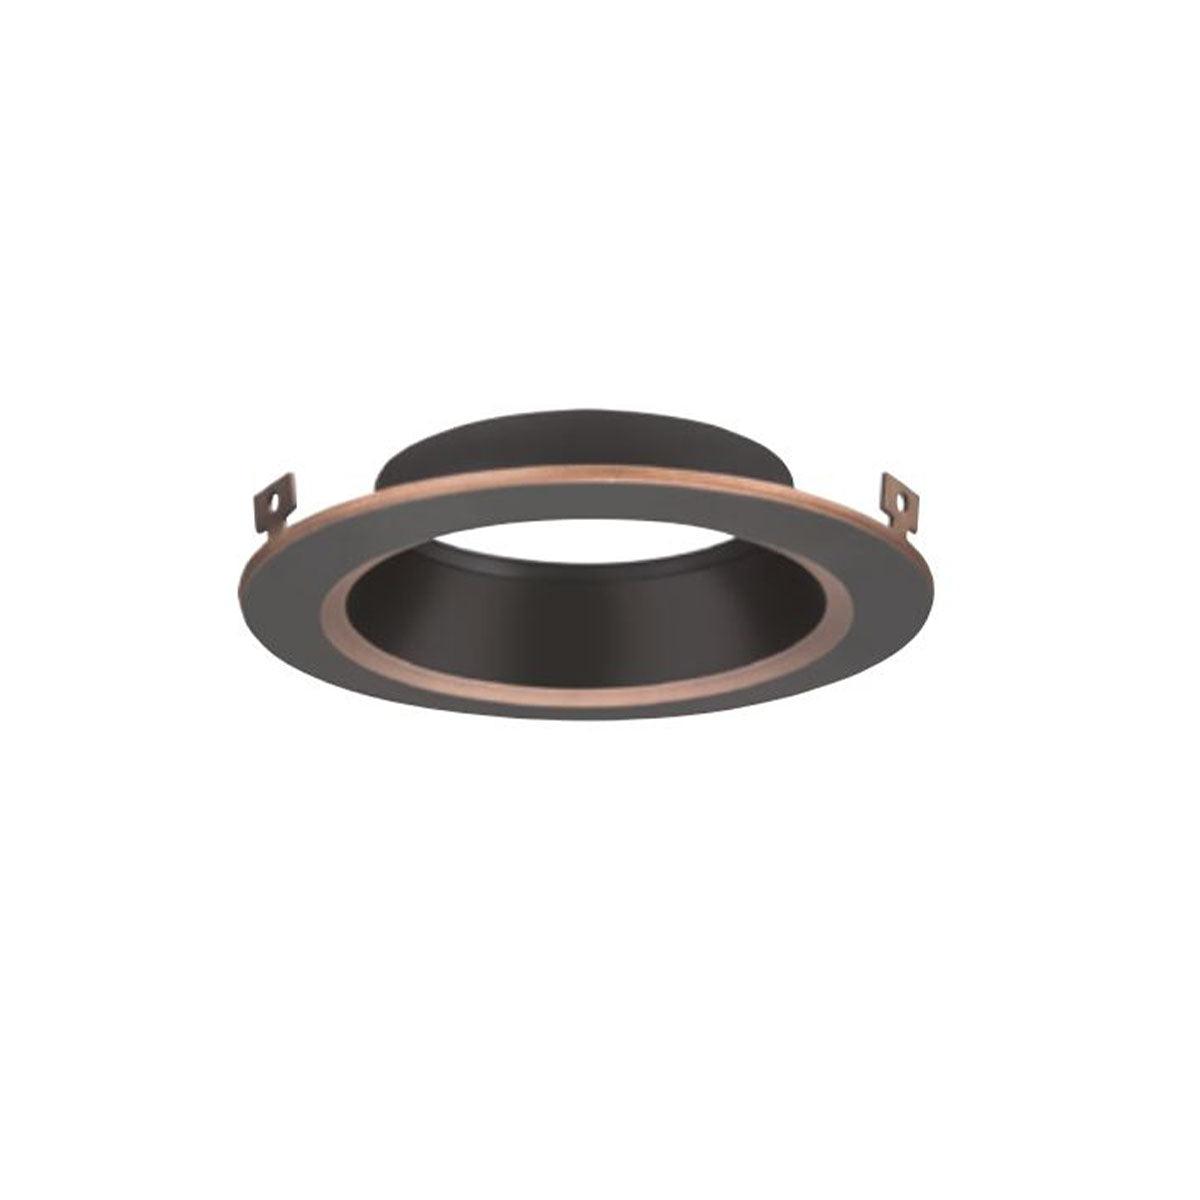 5/6" Round Smooth Reflector Trim Oil Rubbed Bronze Finish